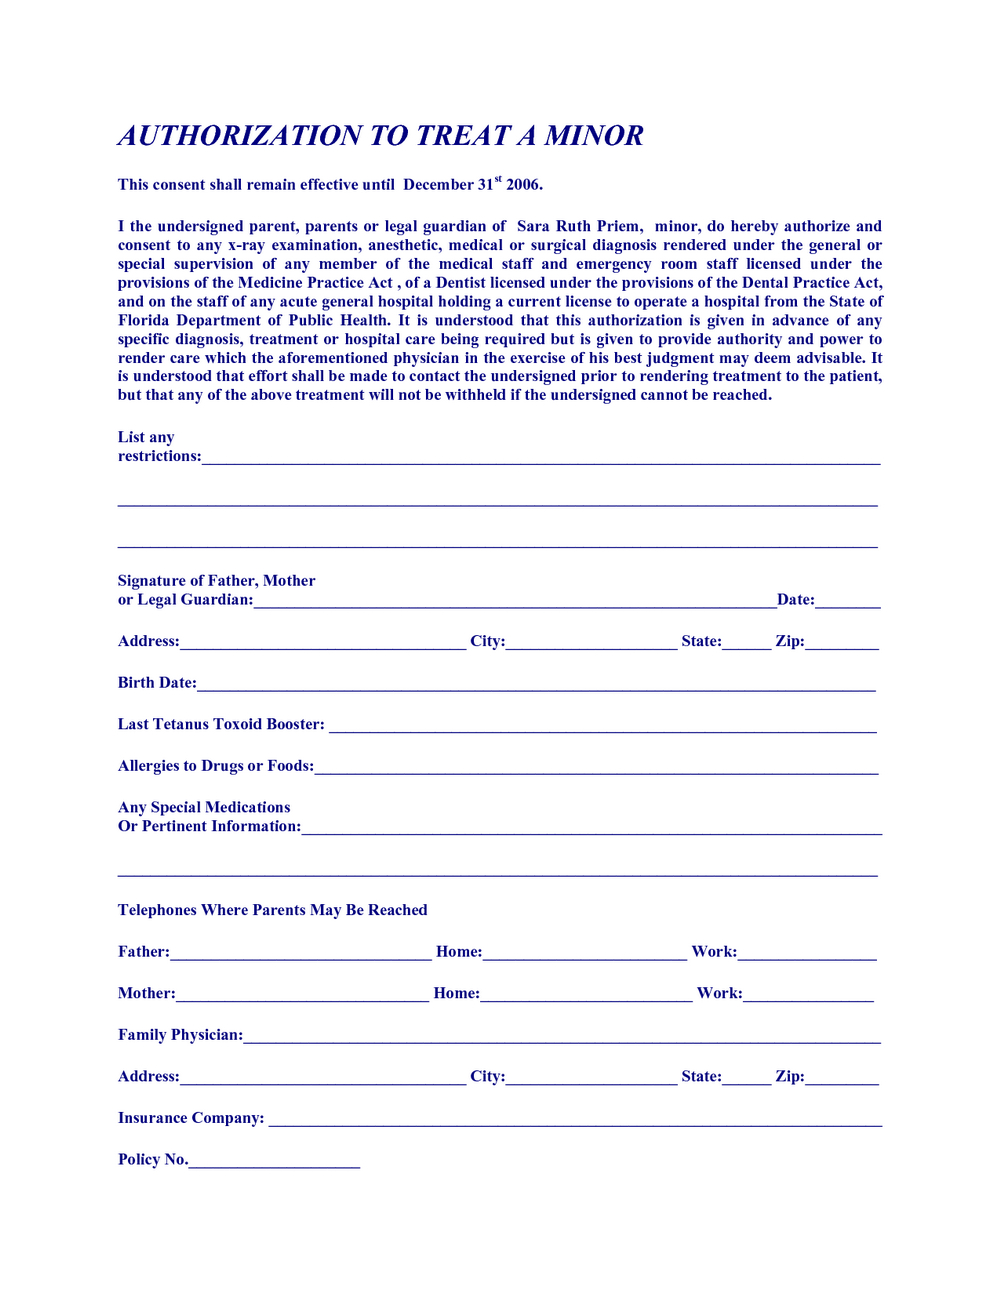 Free Printable Child Medical Consent Form For Grandparents | Mbm Legal - Free Printable Medical Consent Form